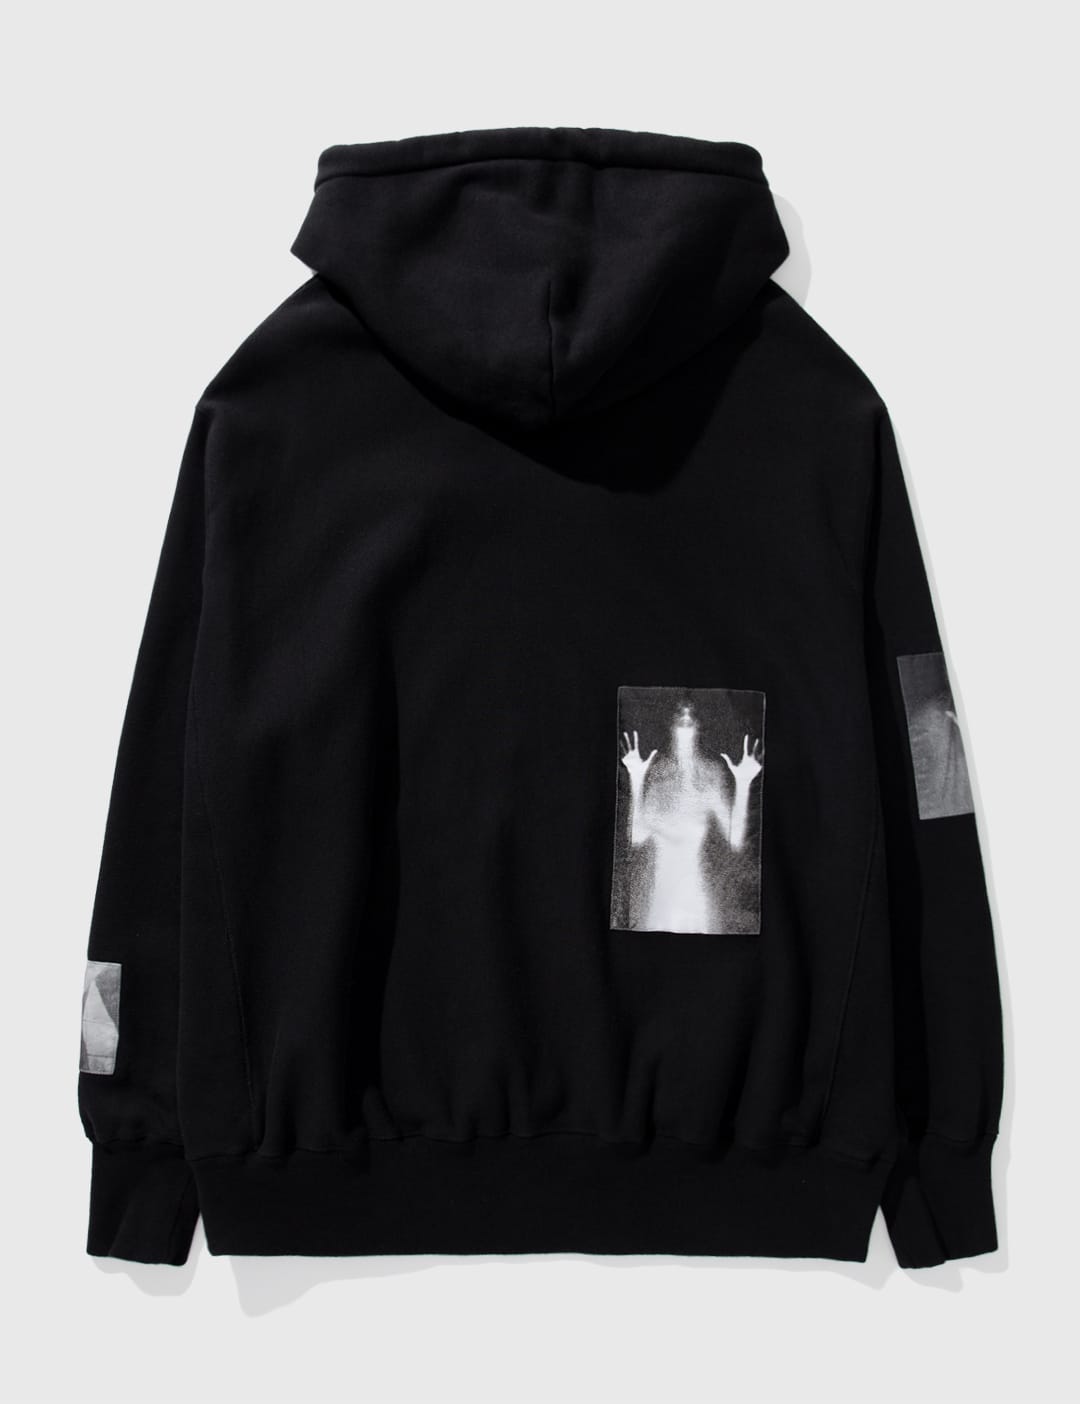 Undercover - Psycho House Graphic Hoodie | HBX - Globally Curated 